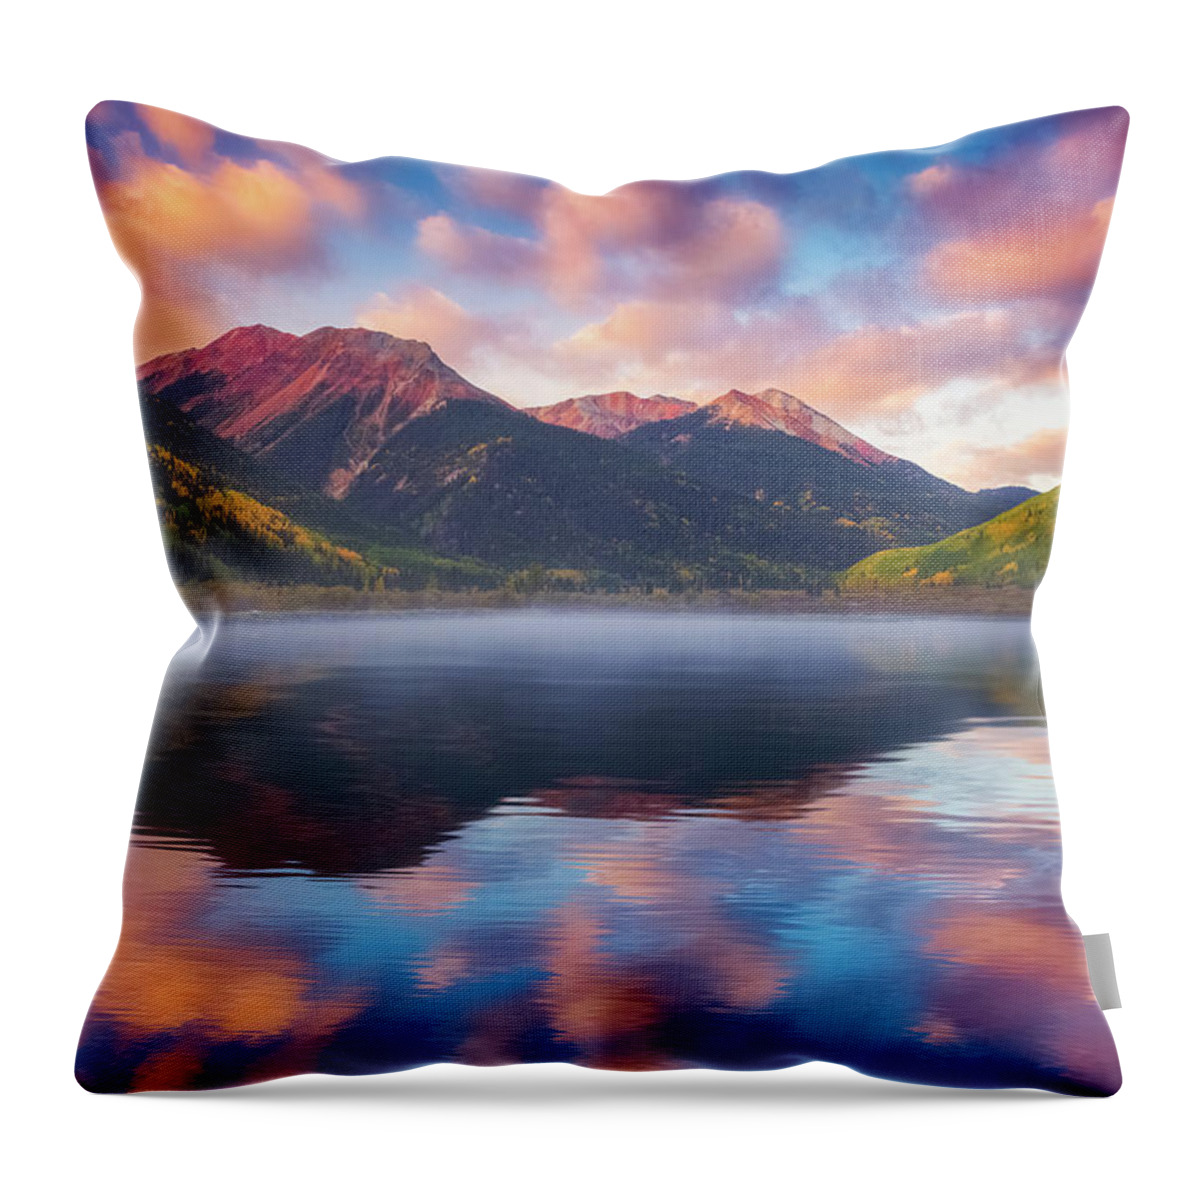 Sunrise Throw Pillow featuring the photograph Red Mountain Reflection by Darren White